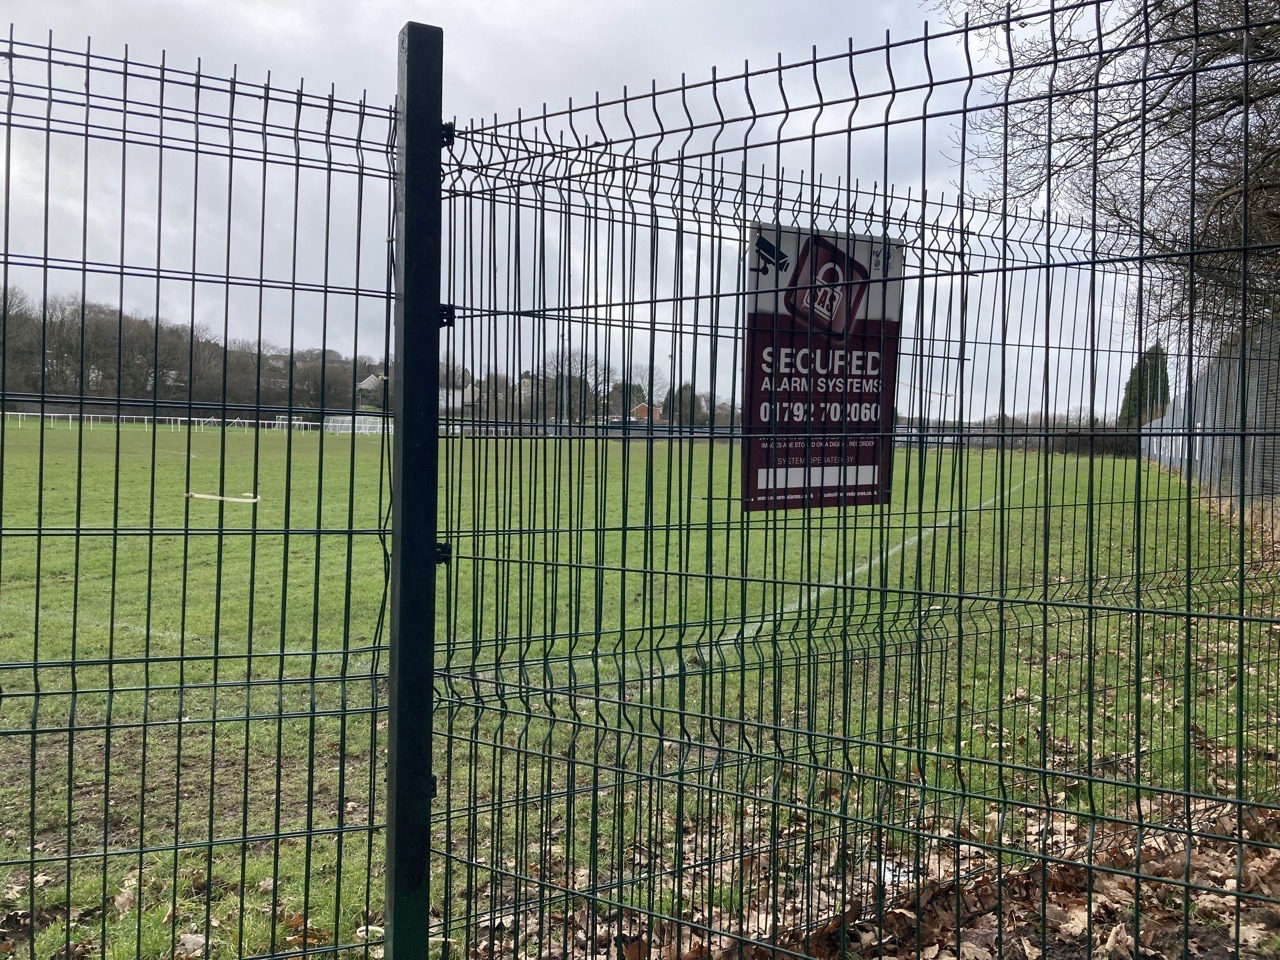 Swansea Council could face legal action after allowing football club to enclose playing fields with fencing